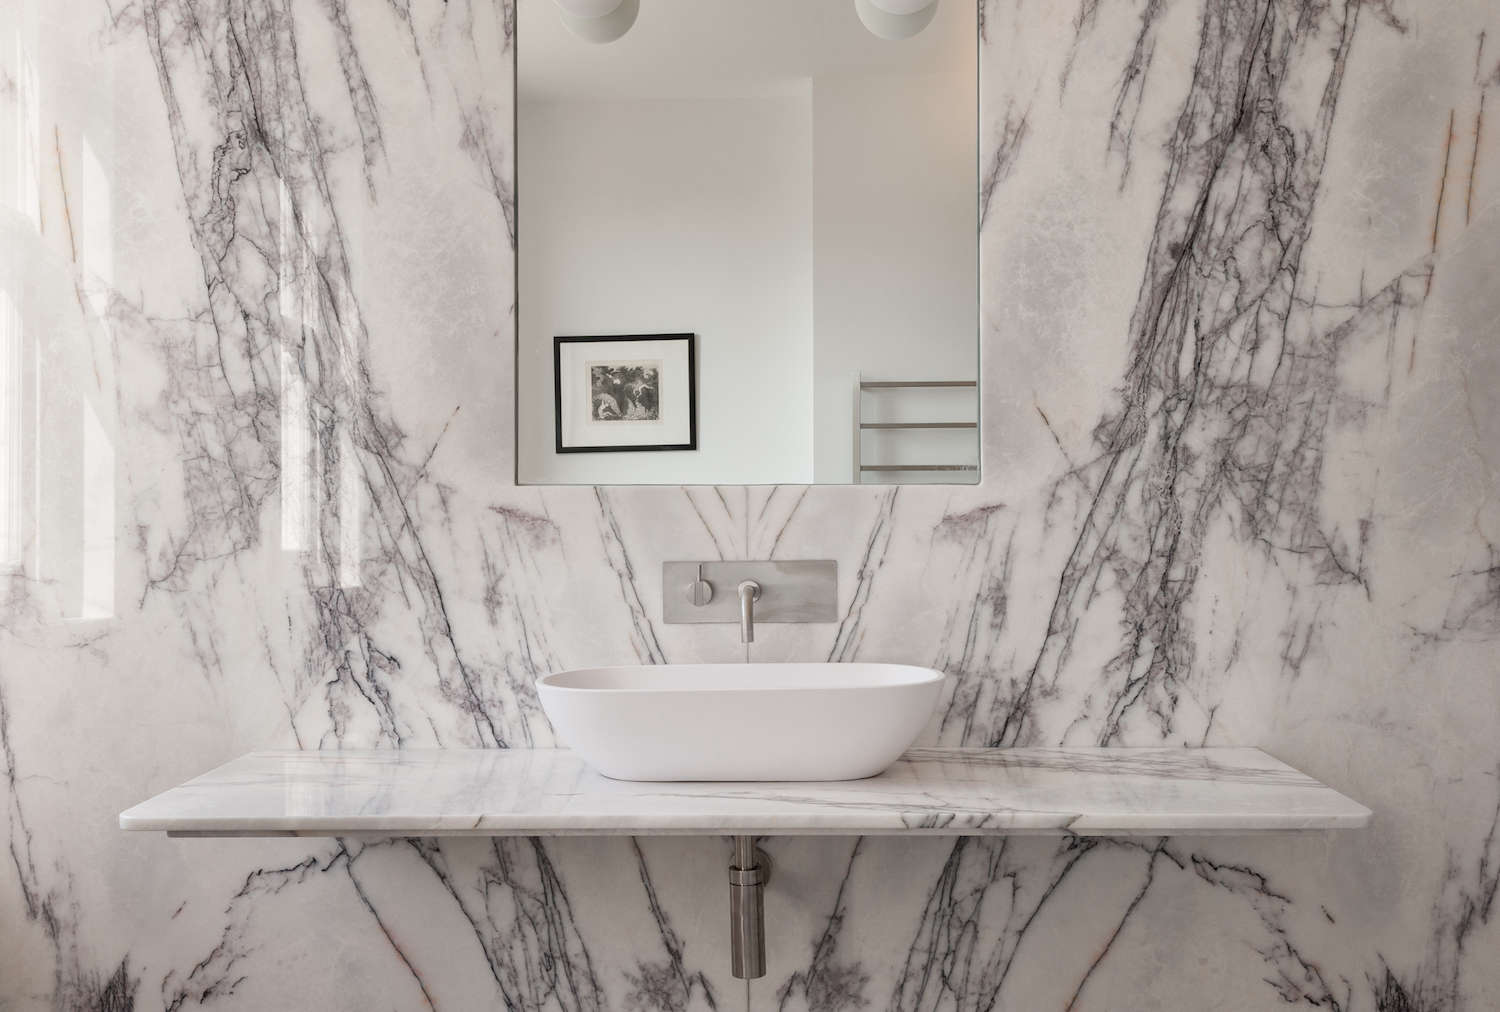 Bathroom of the Week: In London, a Dramatic Turkish Marble Bathroom for a Design-Minded Couple